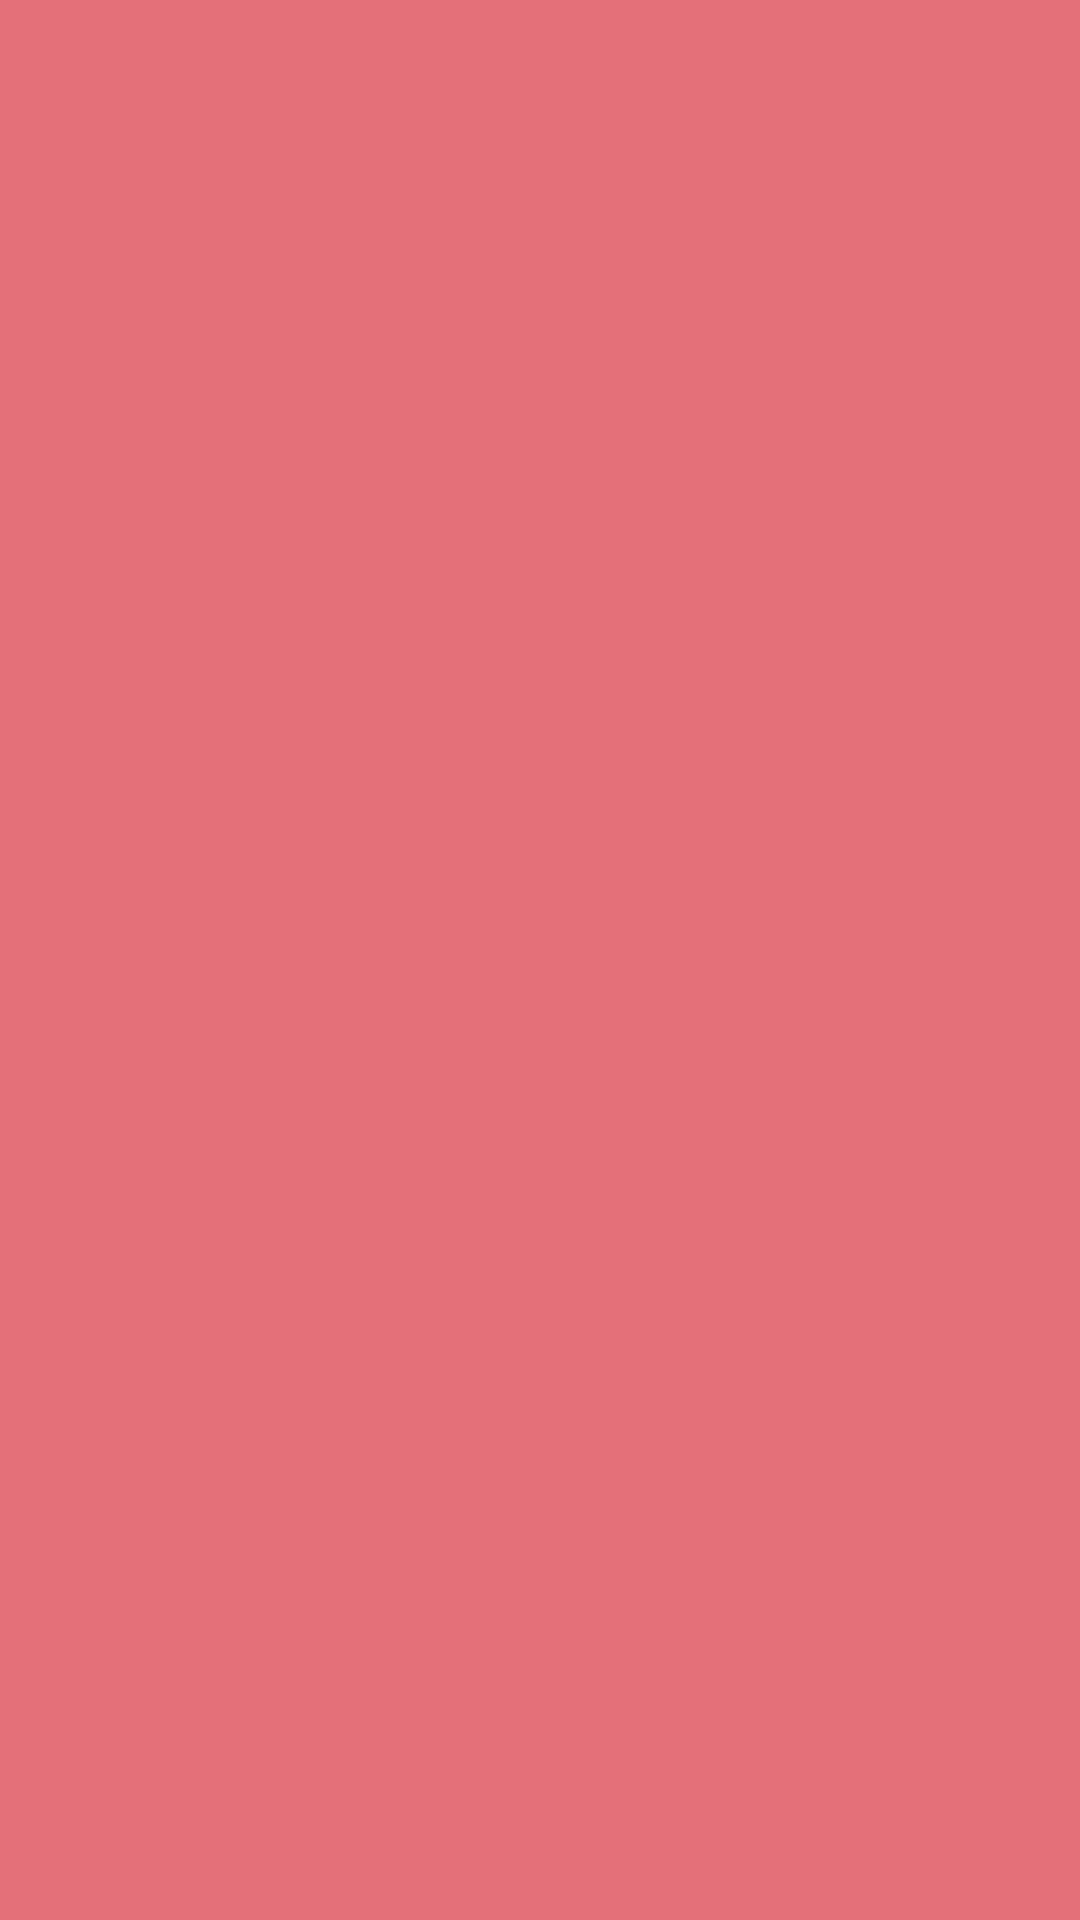 1080x1920 Tango Pink Solid Color Background